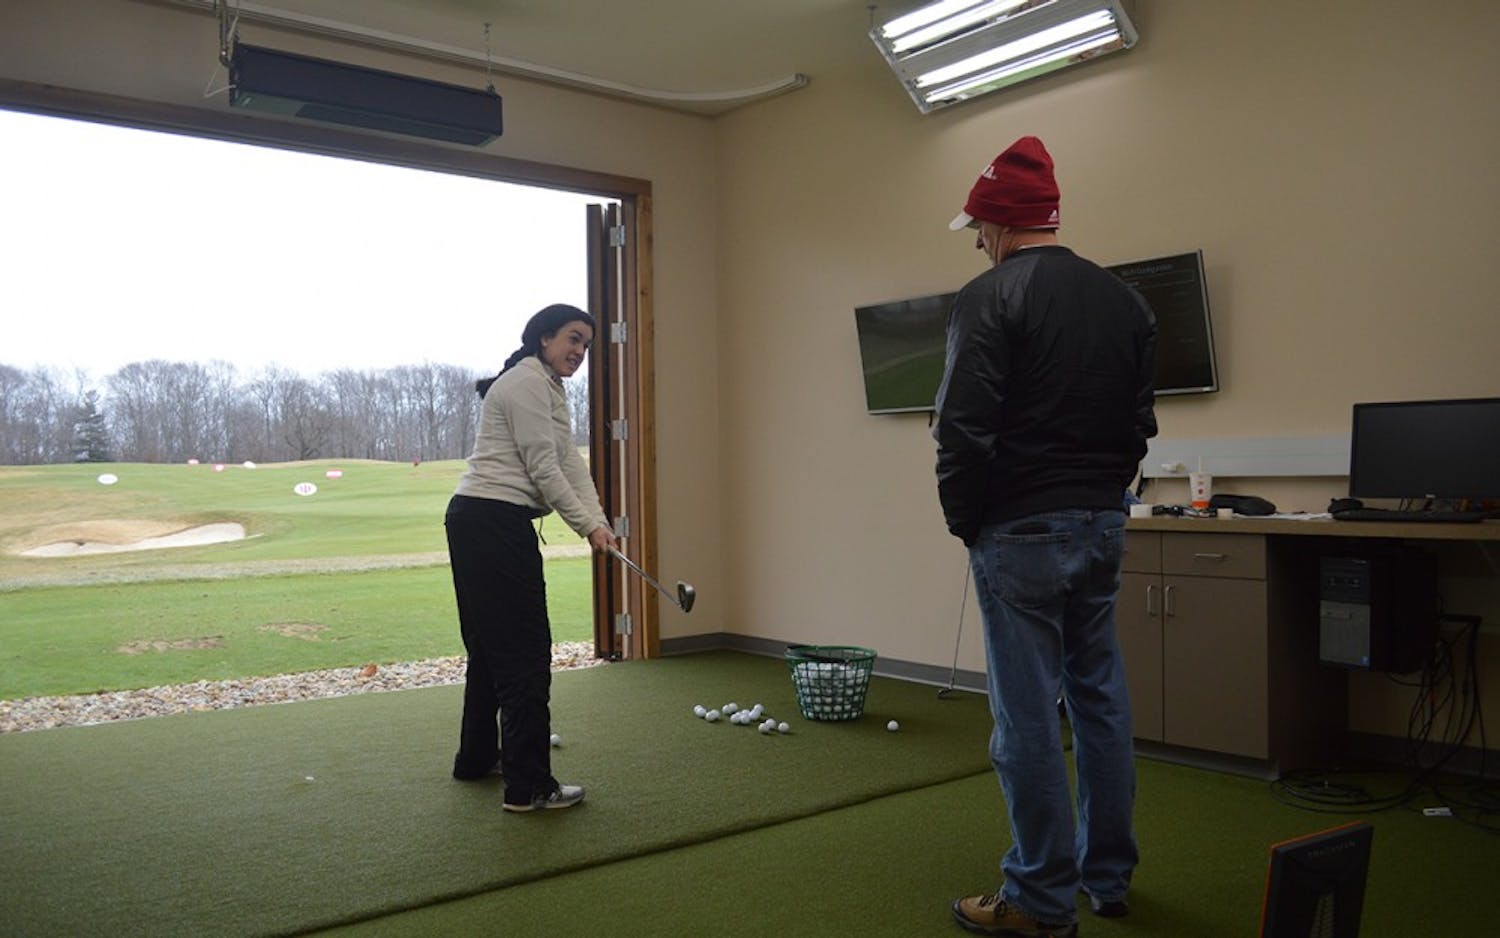 Senior Ana Sanjuan worked on her swing with IU Coach Clint Wallman during an individual training session in early February. Sanjuan and the Hoosiers are traveling to Arizona this weekend for their first tournament of the season.&nbsp;